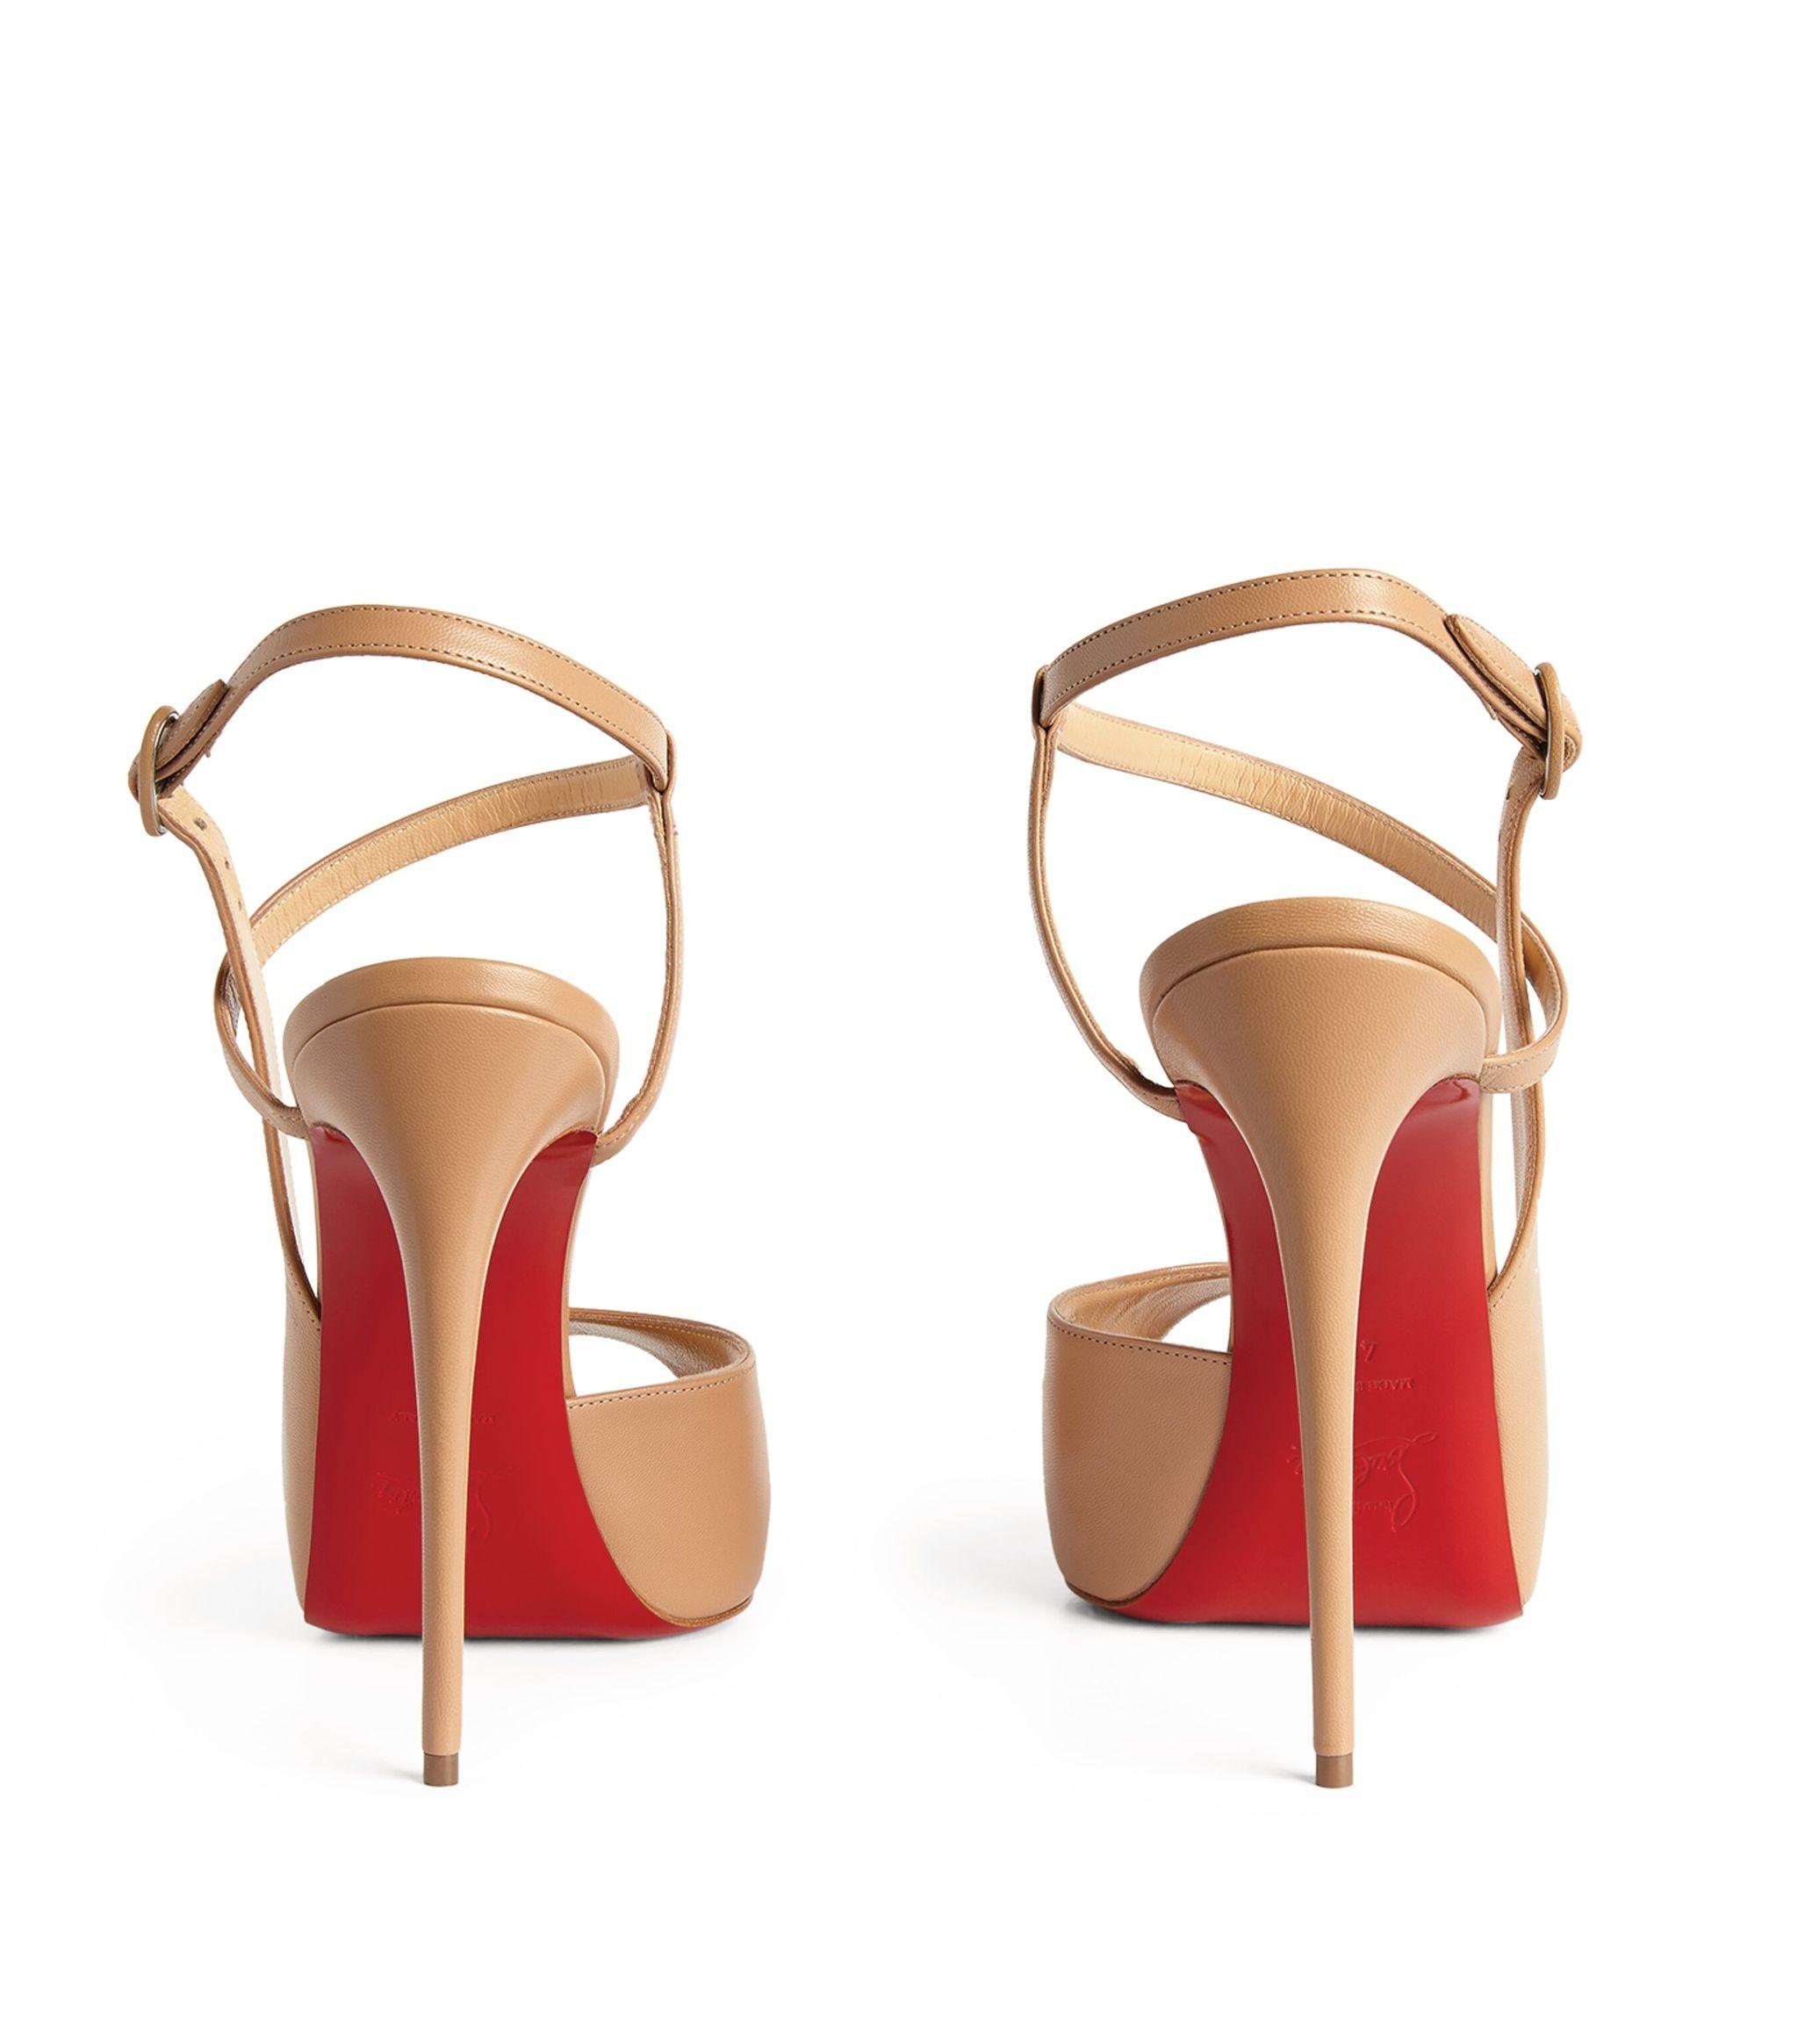 Christian Louboutin Jenlove Alta Leather Pumps 120 in Red - Lyst